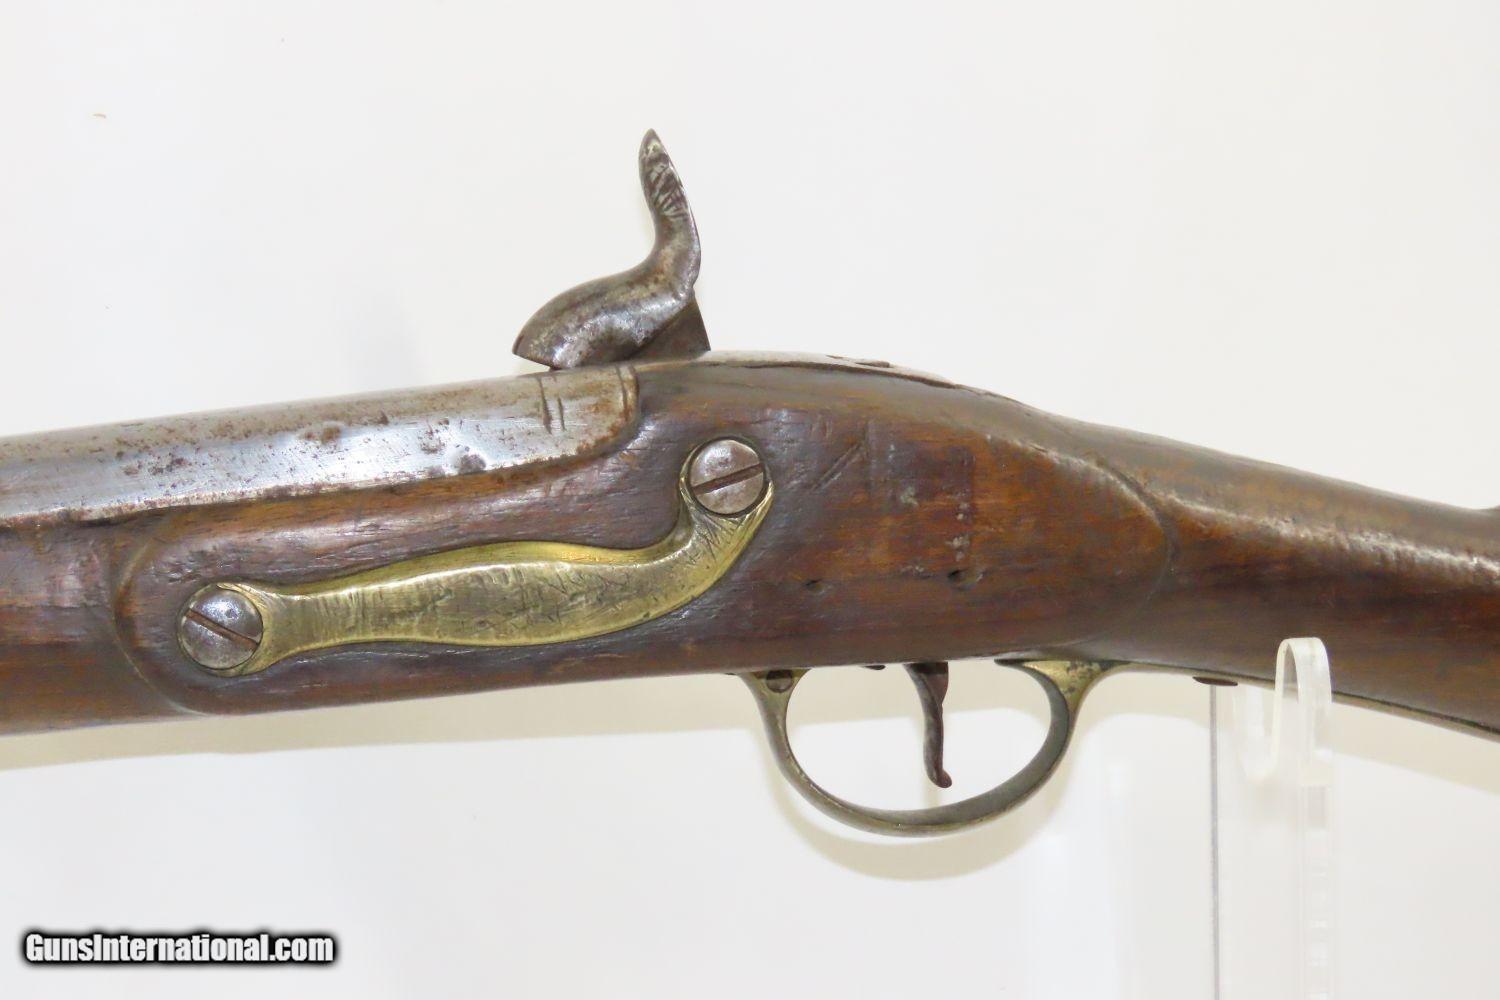 History of a Blunderbuss gun - Pirate rifles, muskets and other weapons